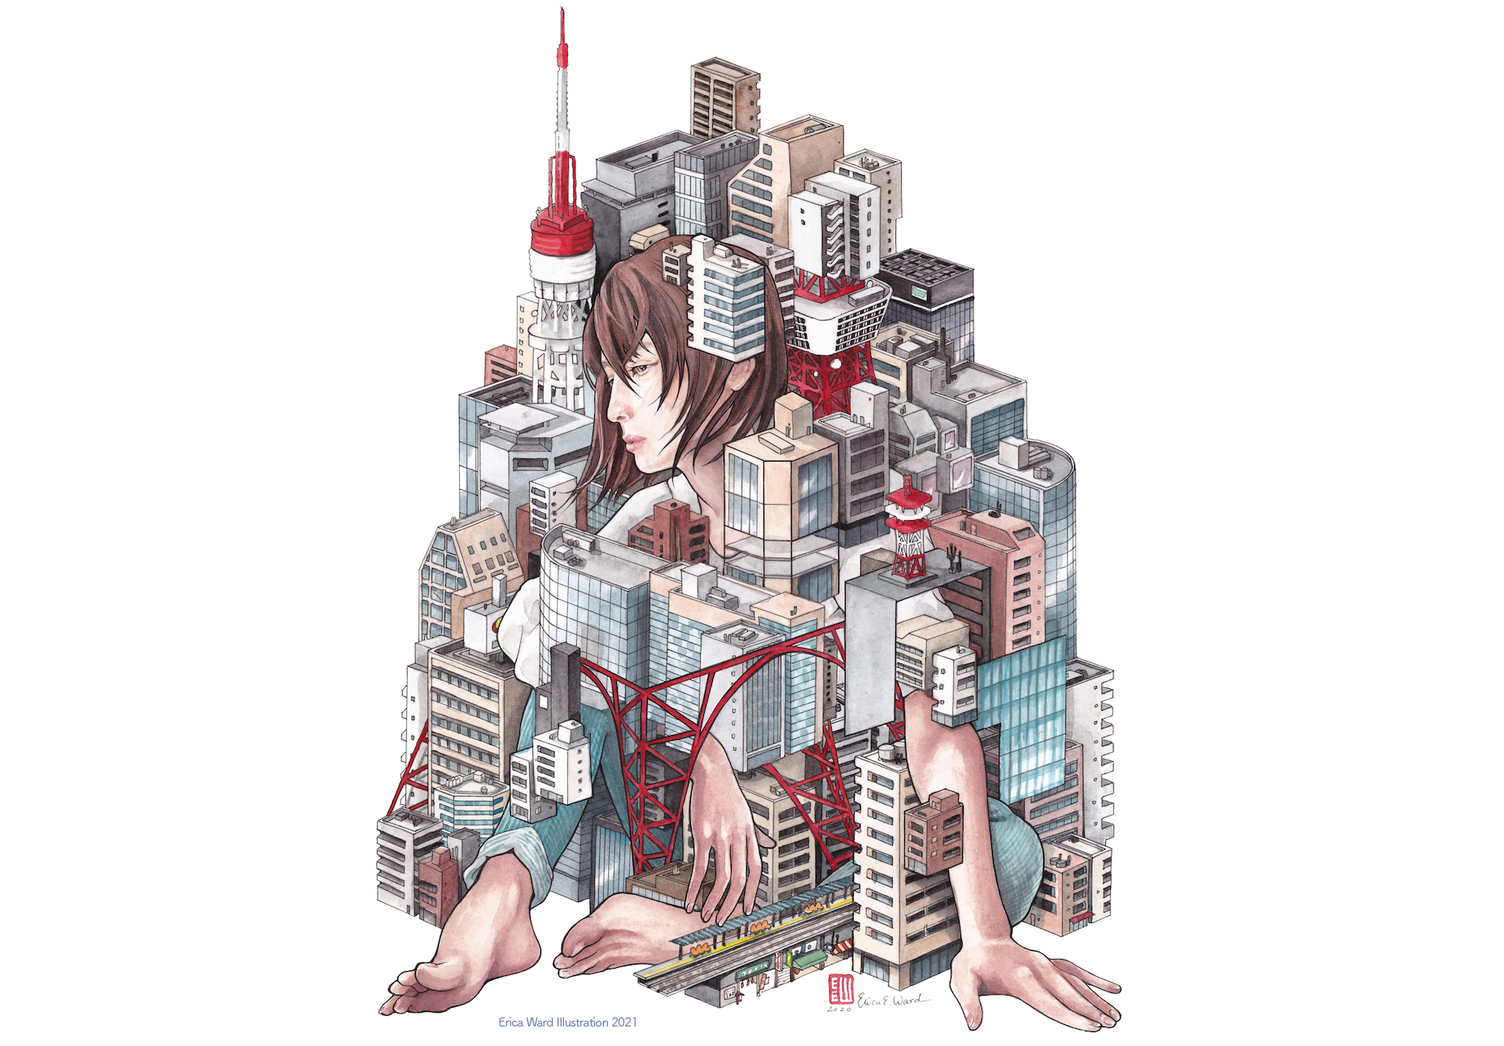 TW Creatives: Erica Ward’s Surreal Tokyo Art is the Japan of Our Dreams